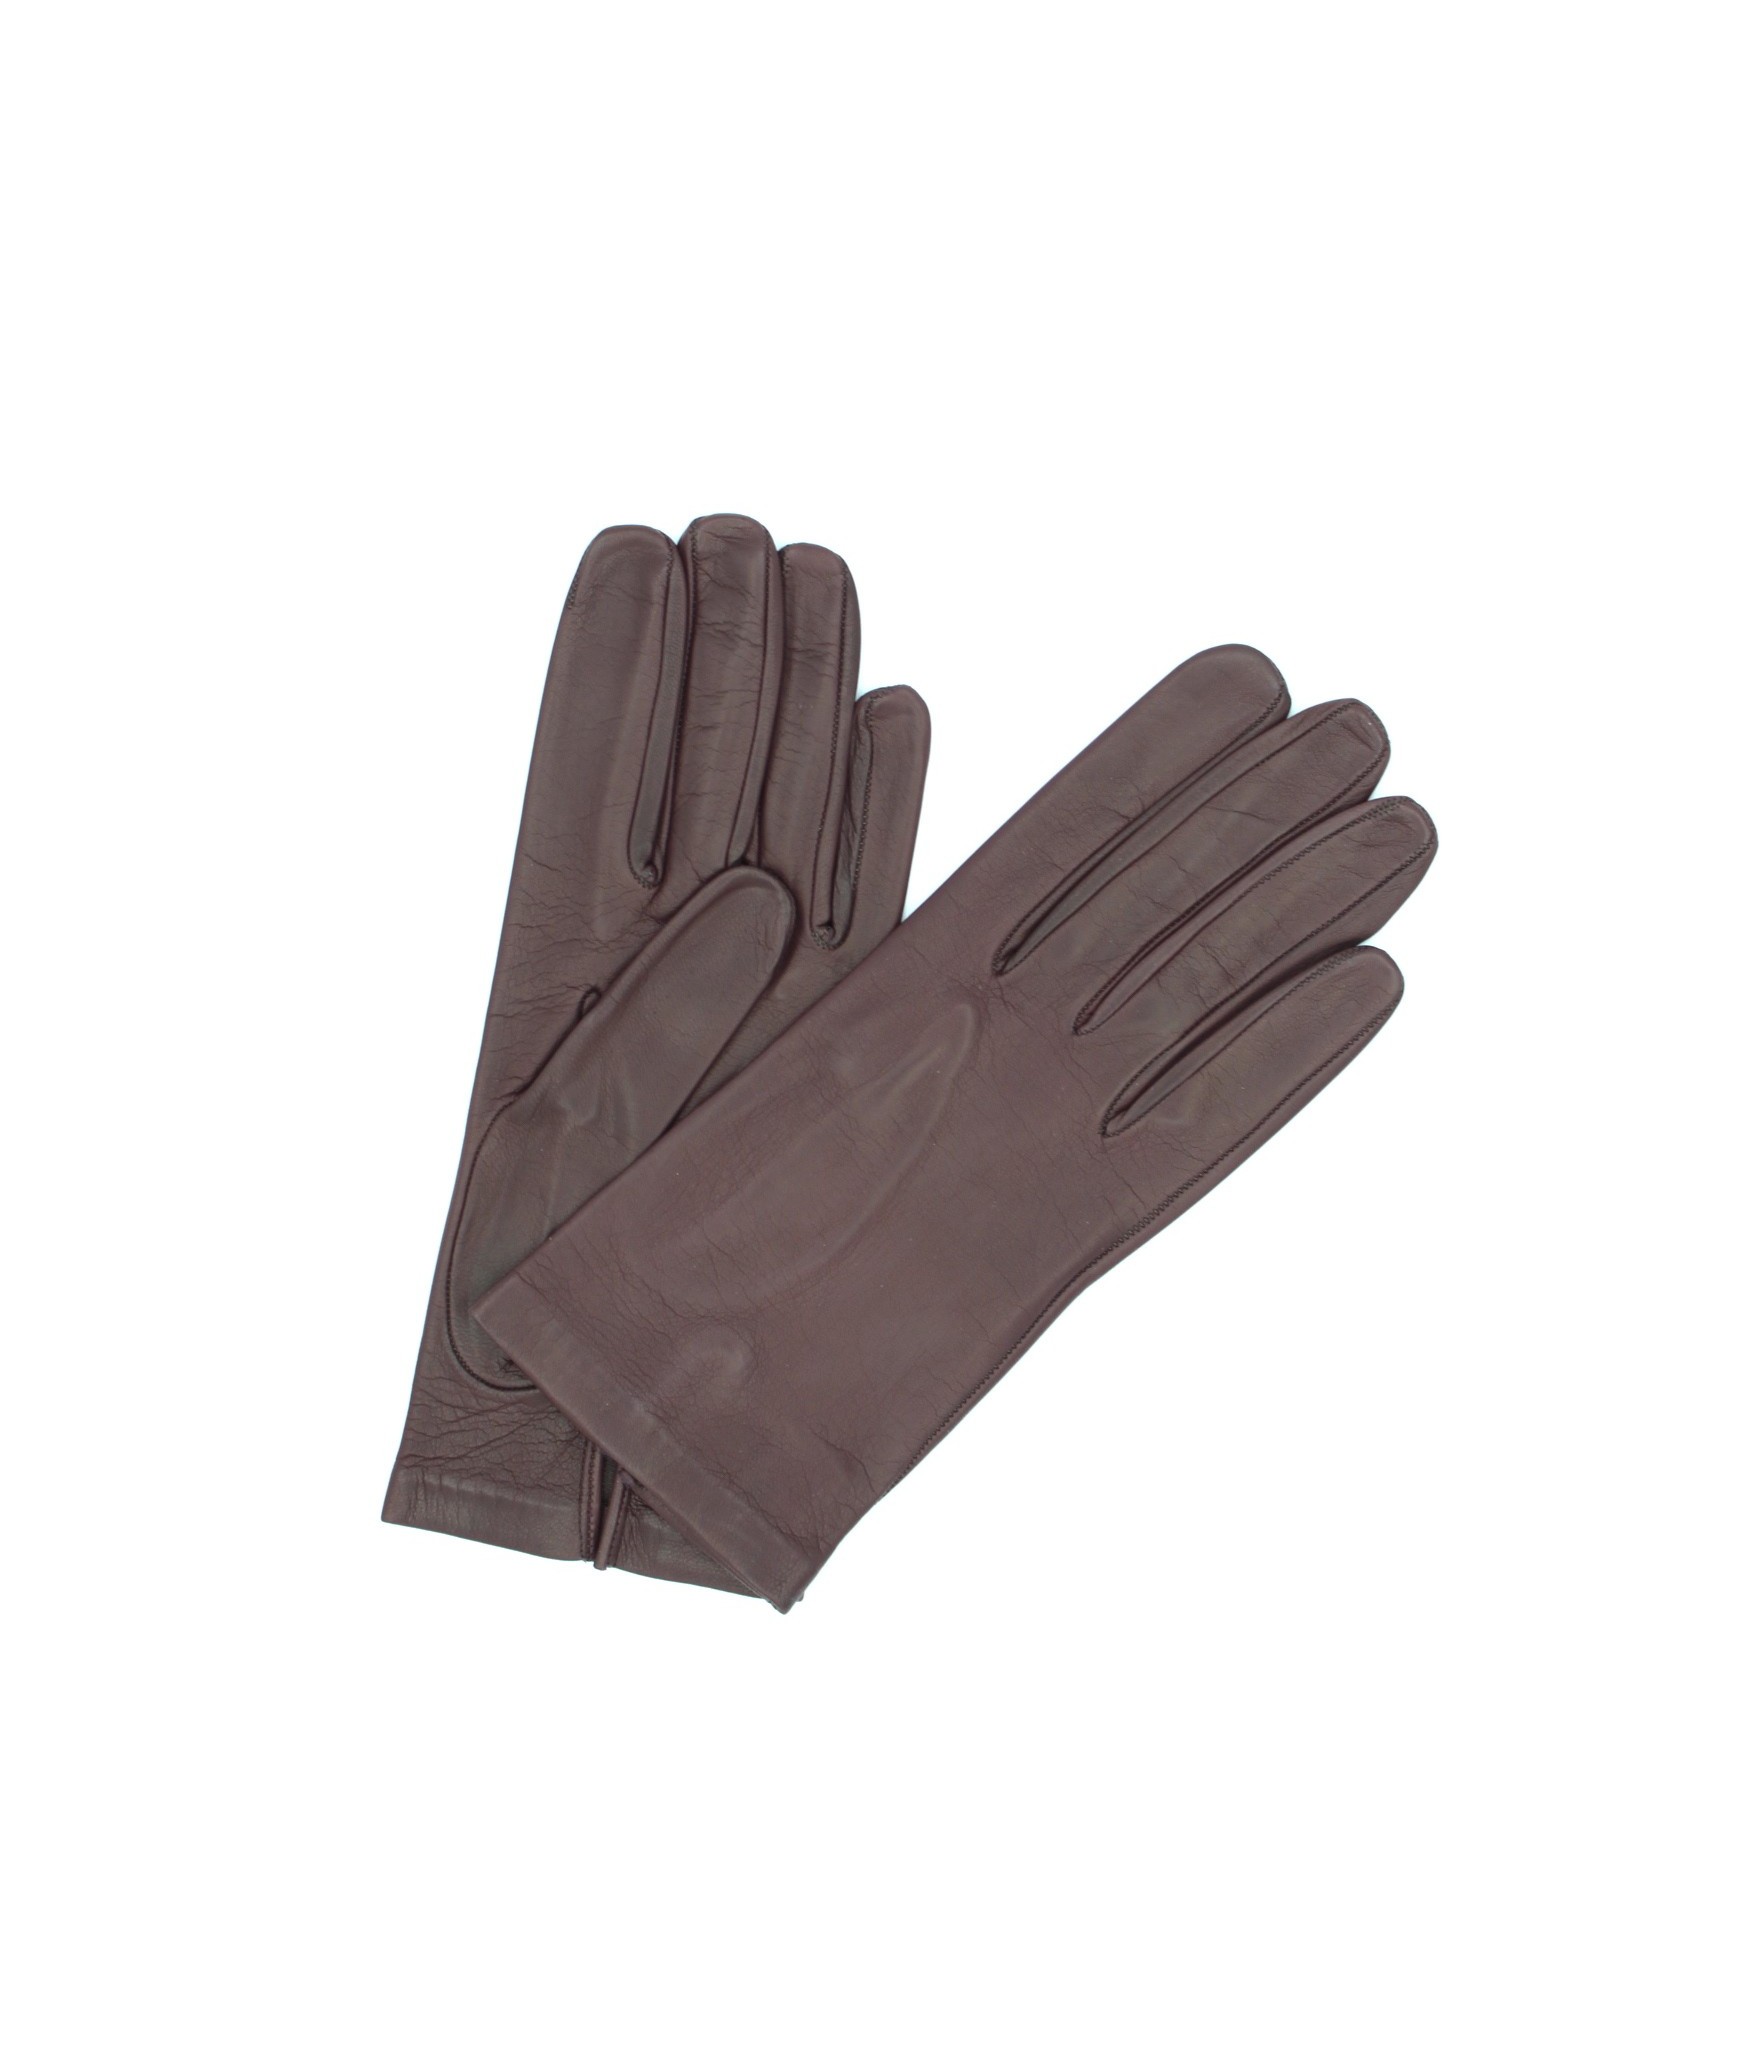 1002 Classic Kid Leather Gloves Silk Lined Bordeaux 